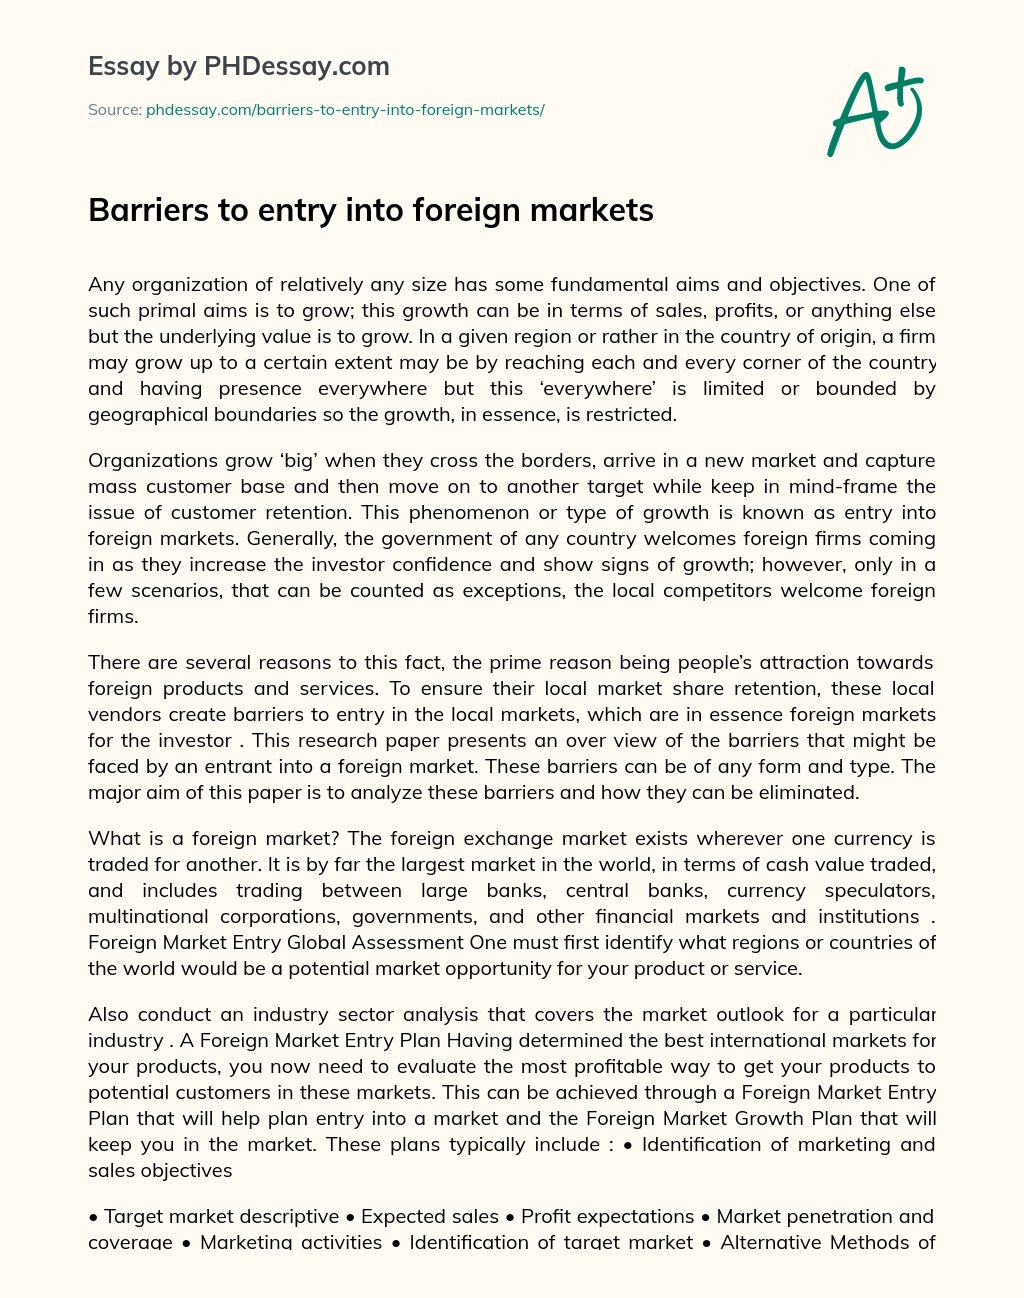 Barriers to entry into foreign markets essay